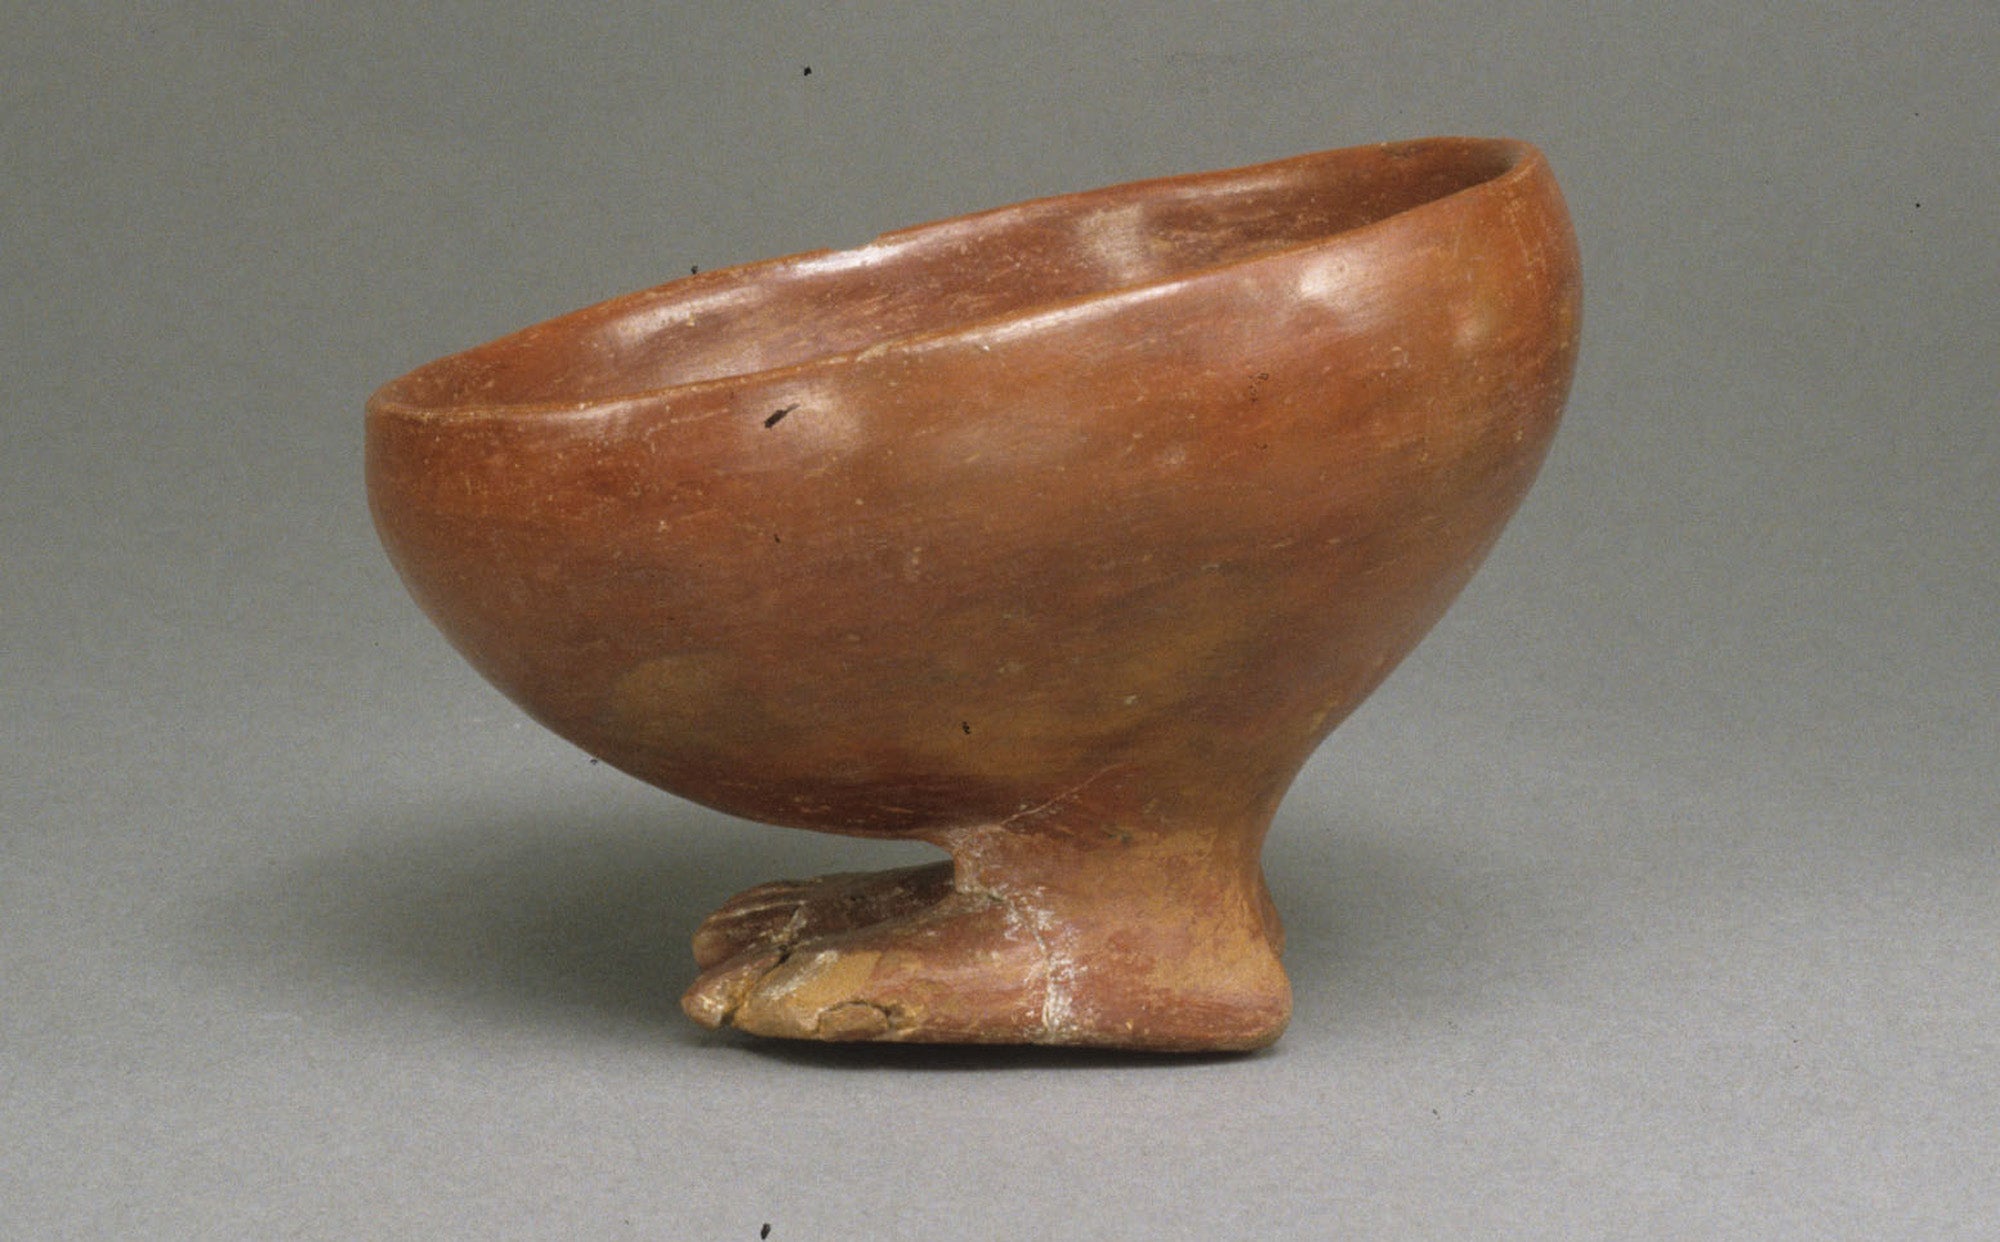 A little rounded brown orange bowl standing on human-shaped feet, from predynastic Egypt circa 3900 –3650 B.C.